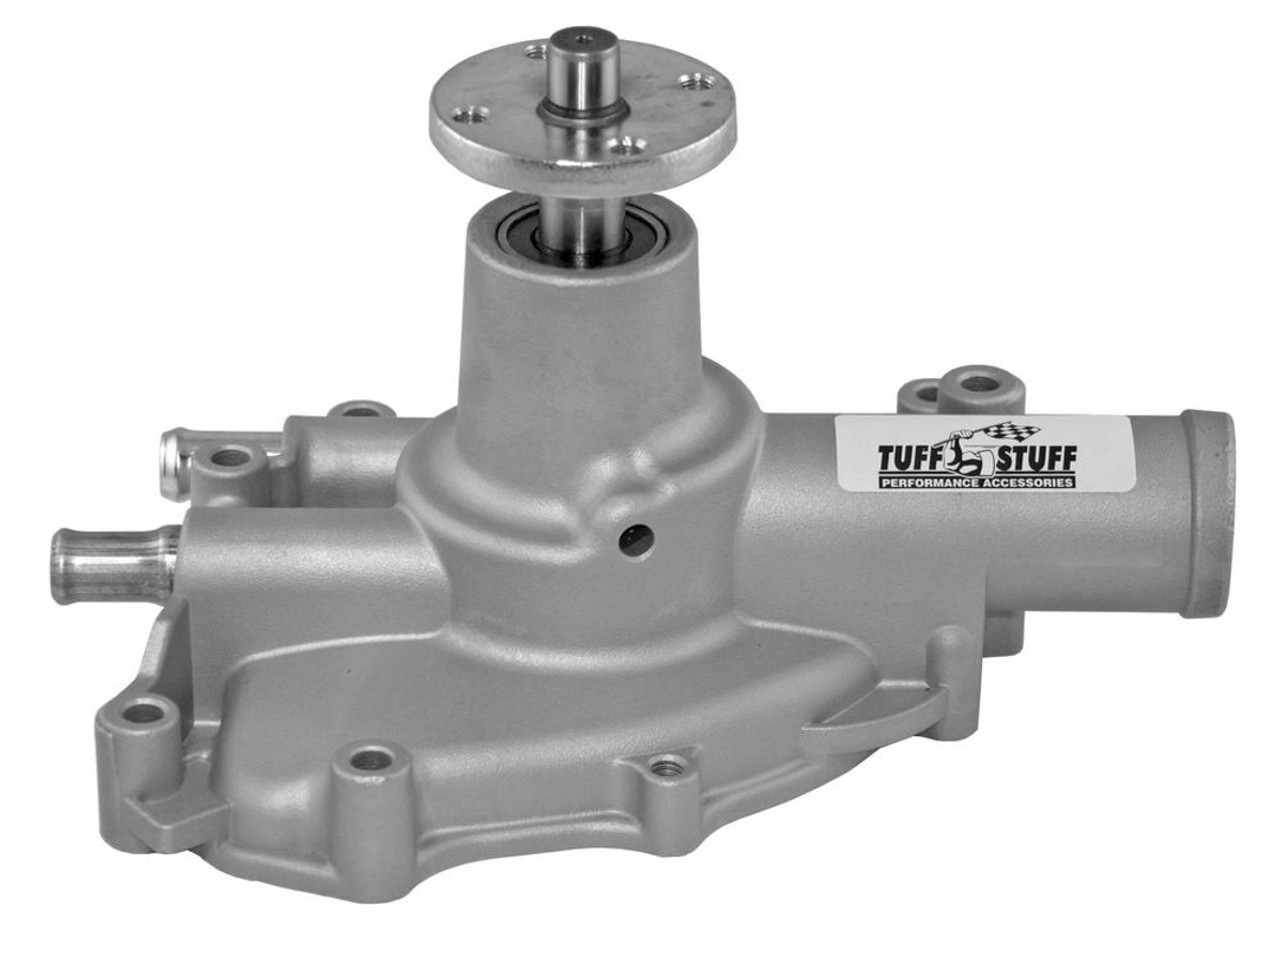 86-93 Ford 5.0L Water Pump as Cast